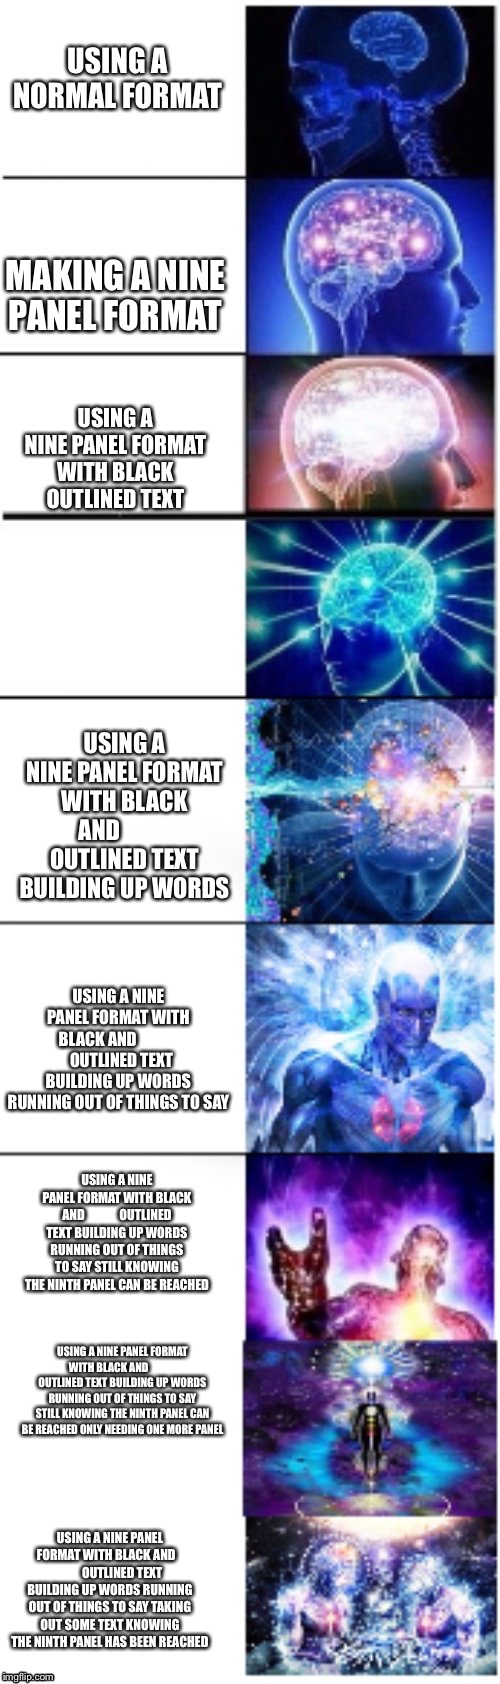 Nine panel expanding brain. This is all I could do. | USING A NORMAL FORMAT; MAKING A NINE PANEL FORMAT; USING A NINE PANEL FORMAT WITH BLACK OUTLINED TEXT; USING A NINE PANEL FORMAT WITH BLACK AND            OUTLINED TEXT BUILDING UP WORDS; USING A NINE PANEL FORMAT WITH BLACK AND                OUTLINED TEXT BUILDING UP WORDS RUNNING OUT OF THINGS TO SAY; USING A NINE PANEL FORMAT WITH BLACK AND              OUTLINED TEXT BUILDING UP WORDS RUNNING OUT OF THINGS TO SAY STILL KNOWING THE NINTH PANEL CAN BE REACHED; USING A NINE PANEL FORMAT WITH BLACK AND              OUTLINED TEXT BUILDING UP WORDS RUNNING OUT OF THINGS TO SAY STILL KNOWING THE NINTH PANEL CAN BE REACHED ONLY NEEDING ONE MORE PANEL; USING A NINE PANEL FORMAT WITH BLACK AND              OUTLINED TEXT BUILDING UP WORDS RUNNING OUT OF THINGS TO SAY TAKING OUT SOME TEXT KNOWING THE NINTH PANEL HAS BEEN REACHED | image tagged in expanding brain | made w/ Imgflip meme maker